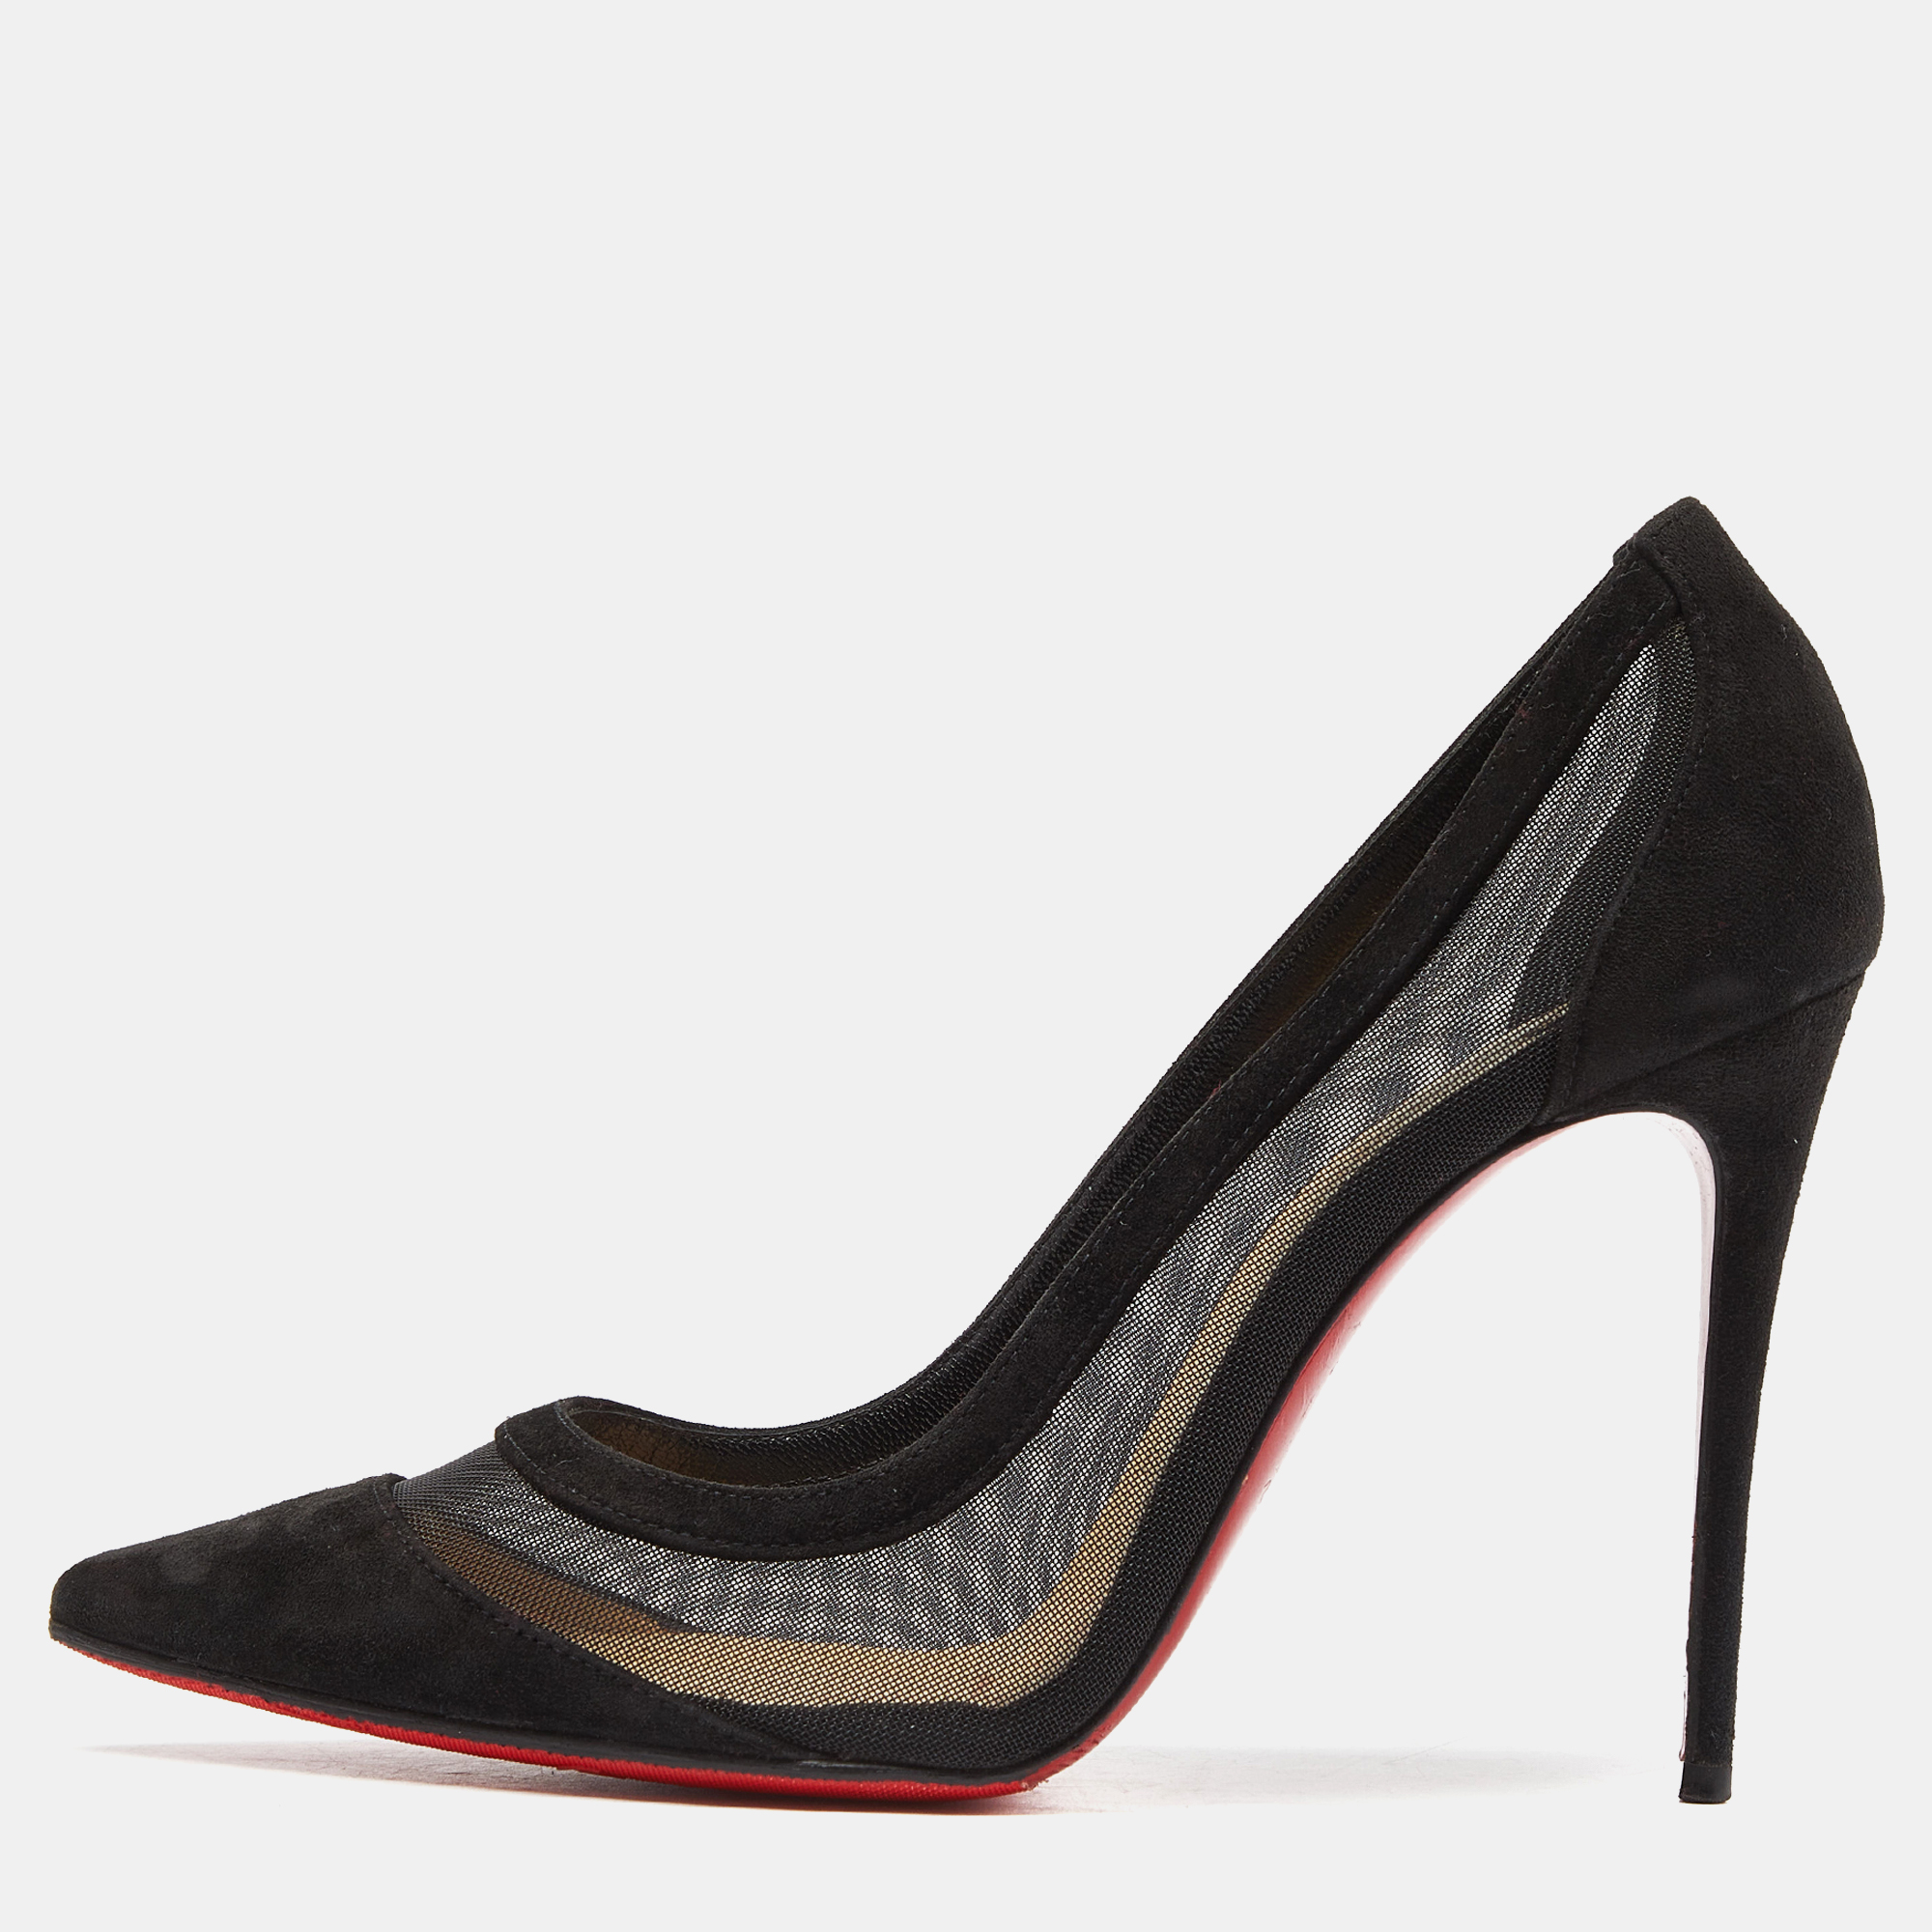 Christian louboutin black suede and mesh galativi strass pumps size 37.5